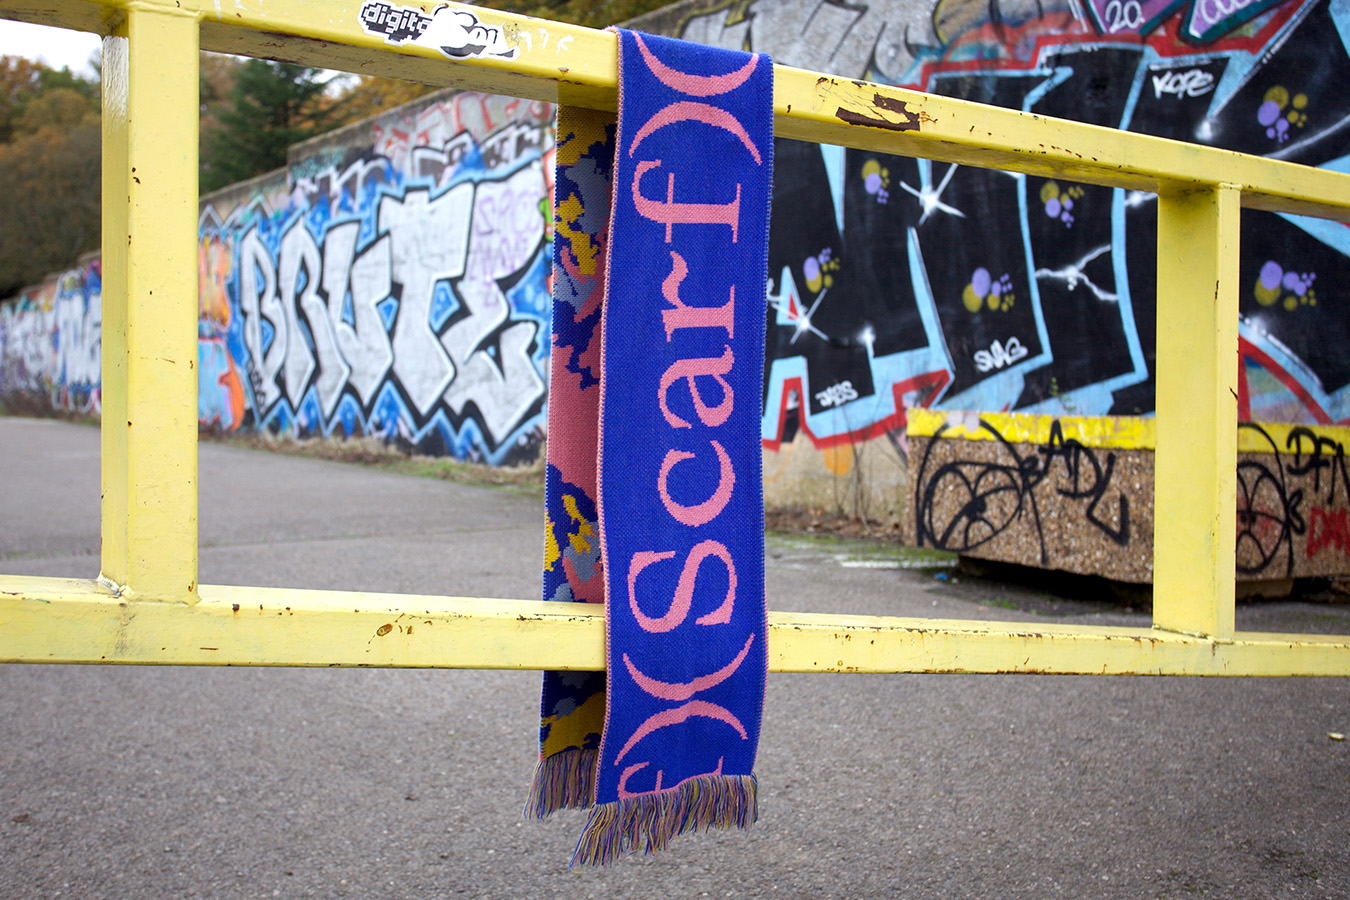 The final image of scarf has the scarf hanging from a metal gate, behind it is graffiti and urban settings